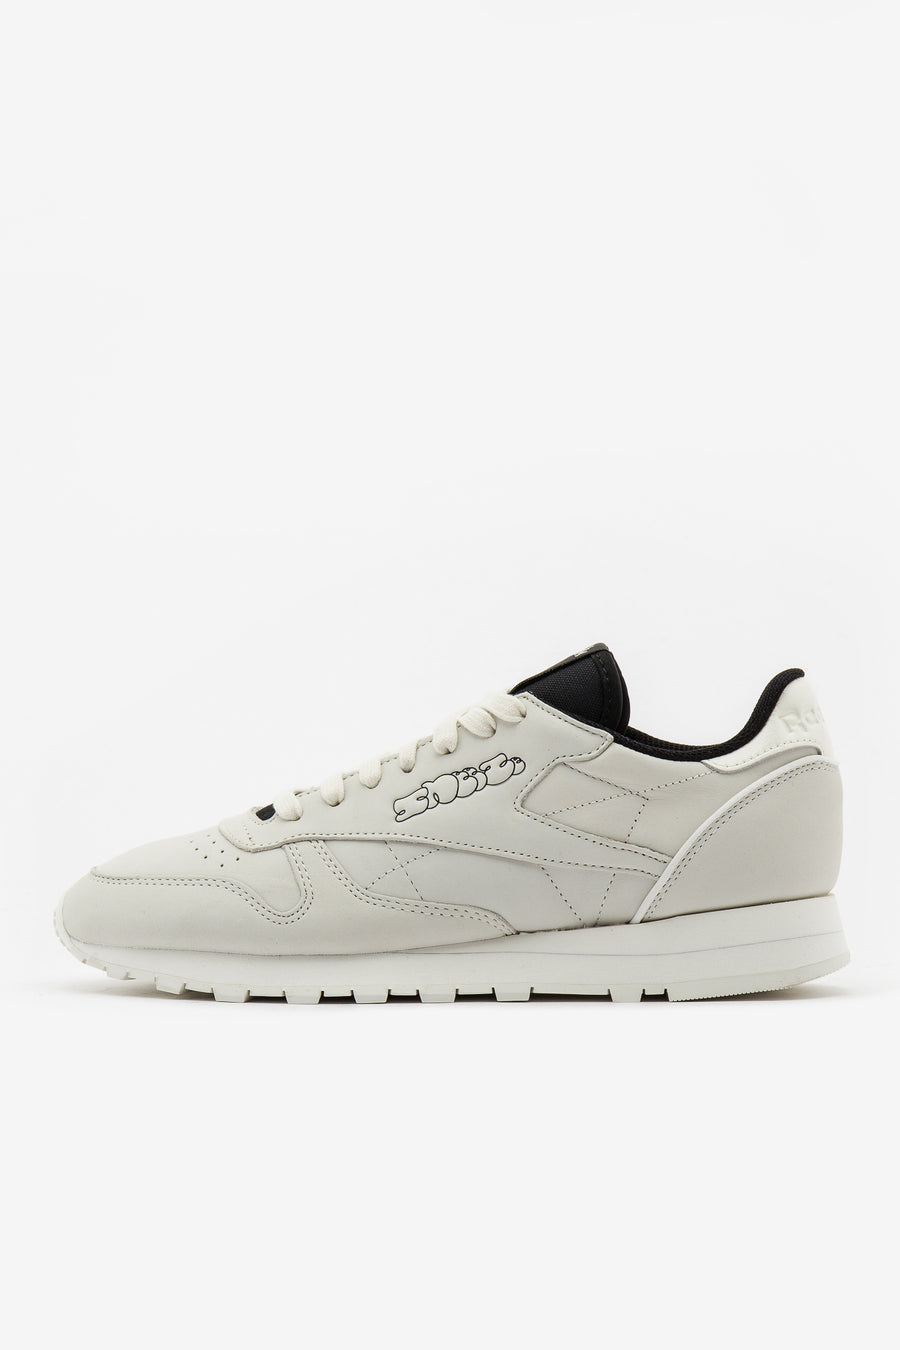 SNEEZE Classic Leather Sneaker in White/Chalk/Core Black